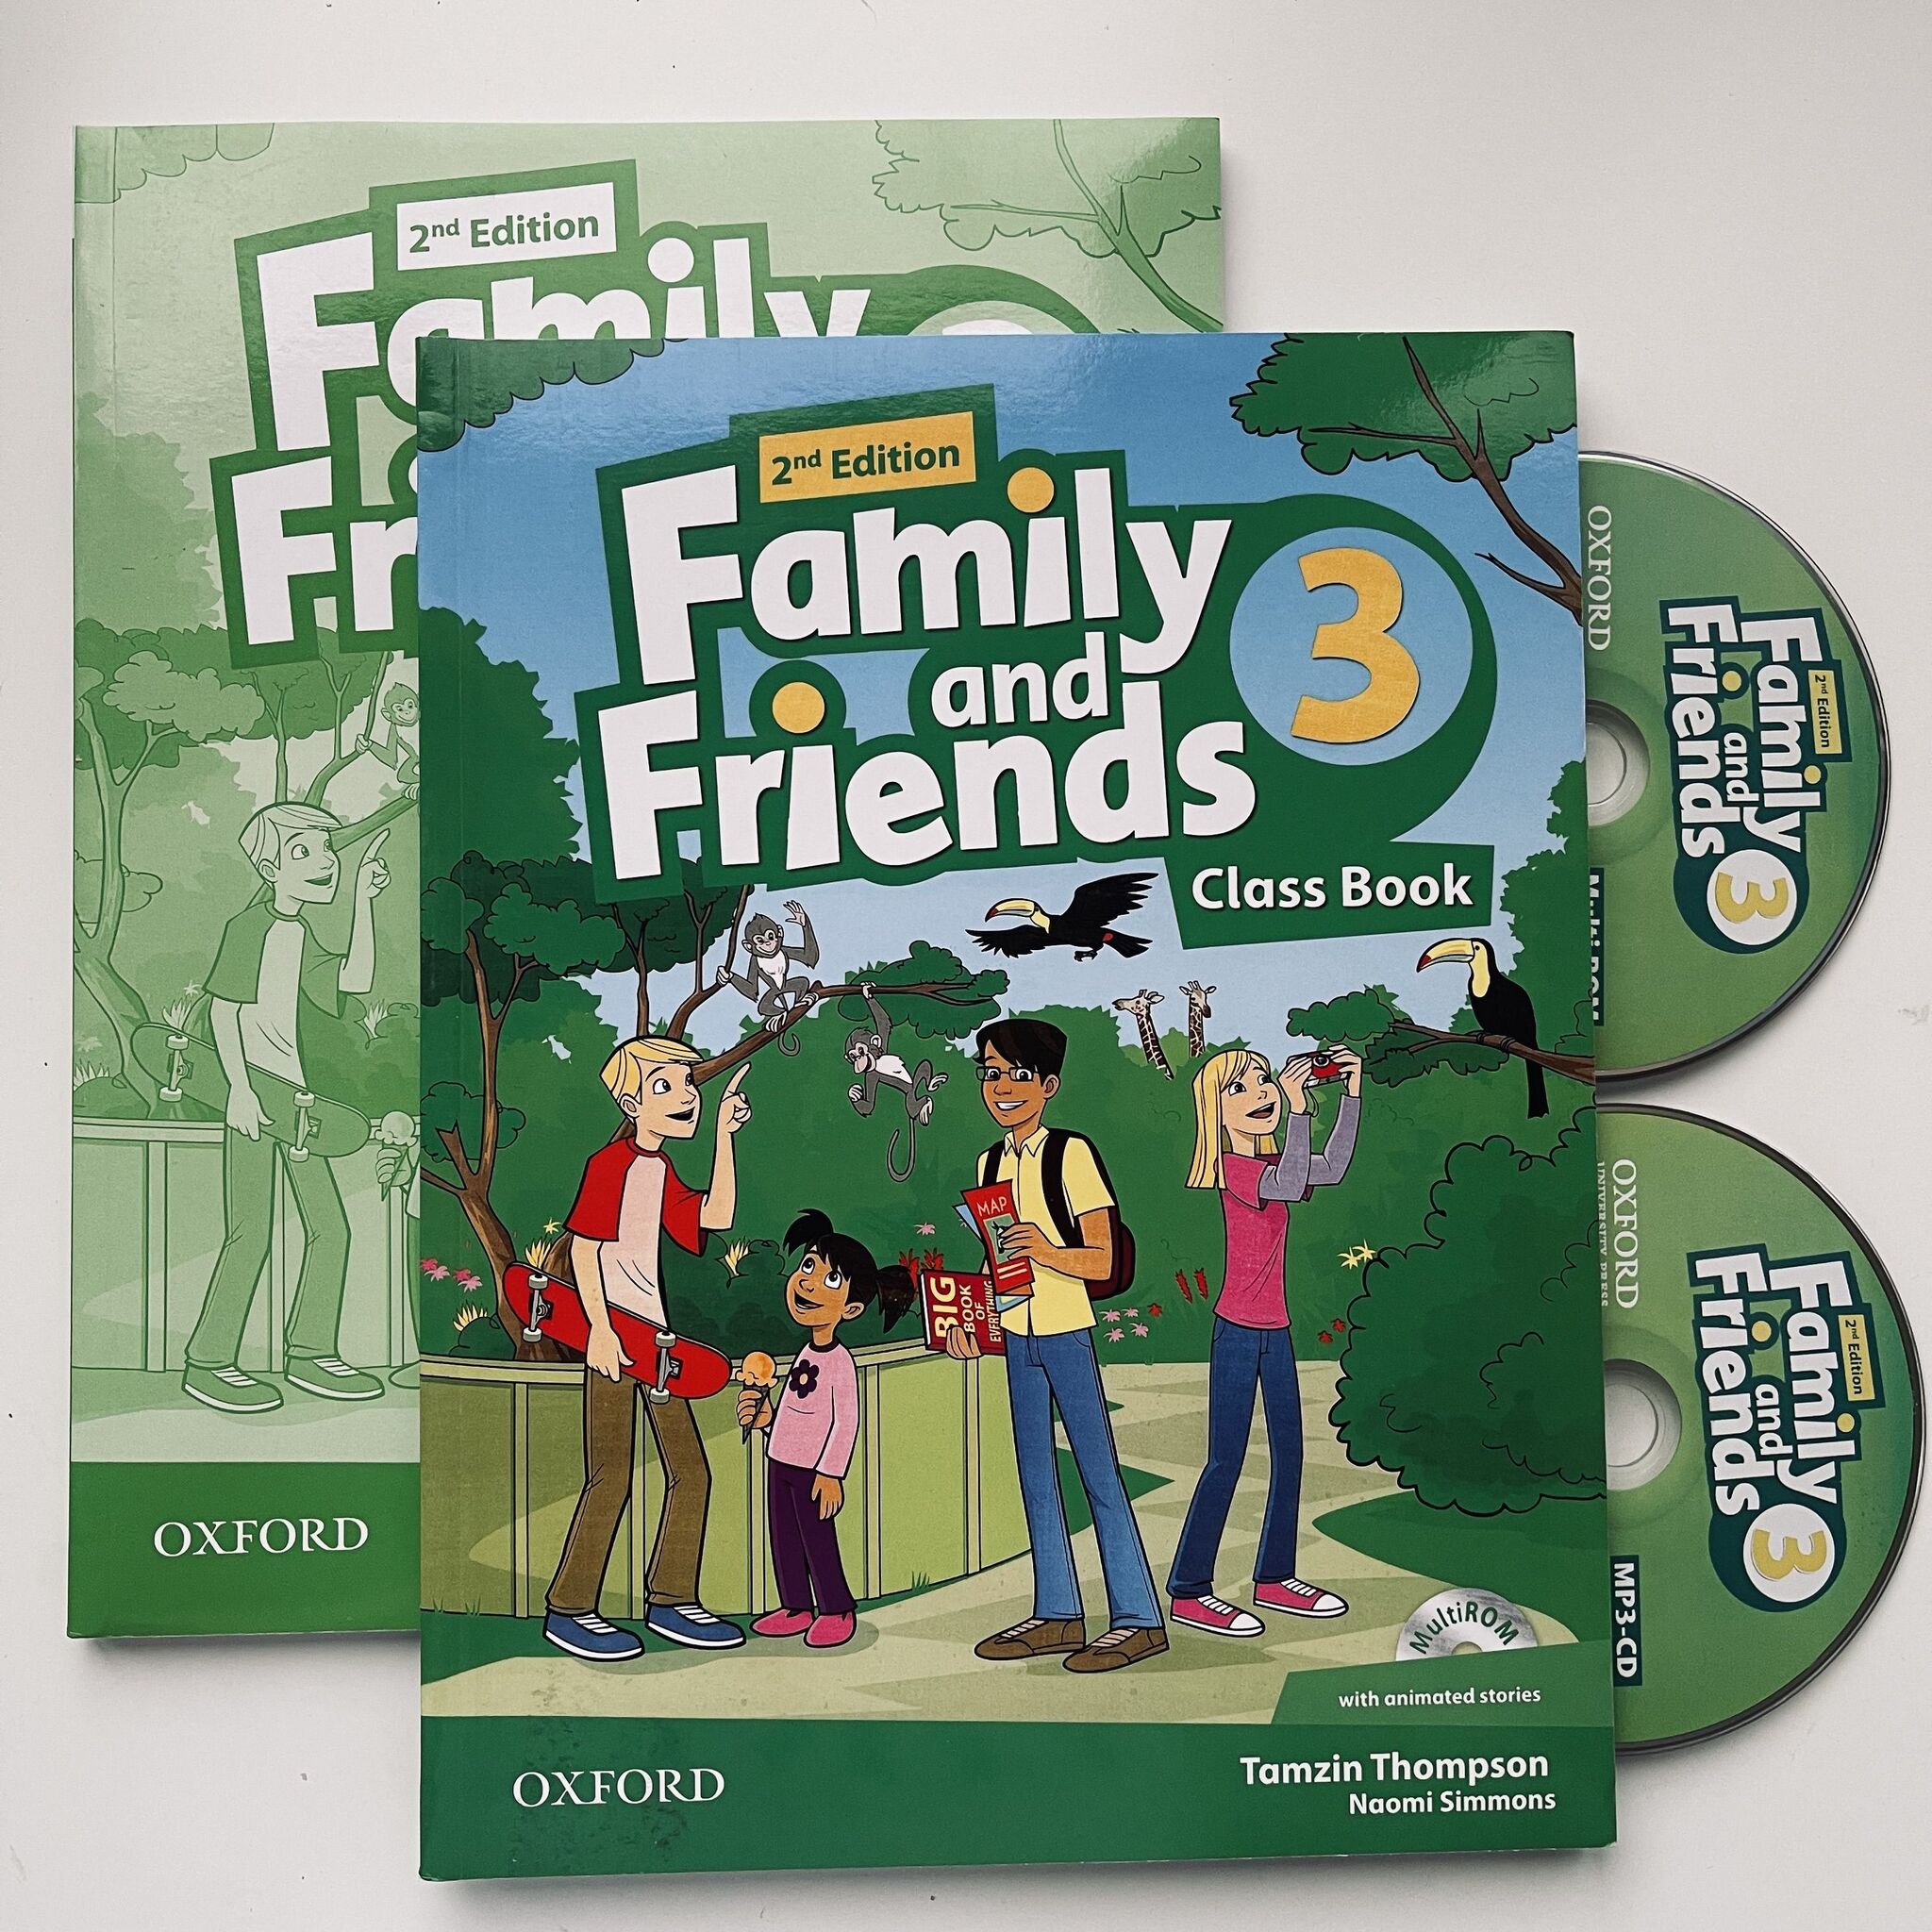 Английский язык family and friends 3 workbook. Family and friends 3 Workbook Оксфорд Liz Driscoll. 2nd Edition Family friends Workbook Oxford Naomi Simmons. Family and friends 3 рабочая тетрадь. Family and friends 3 class book.